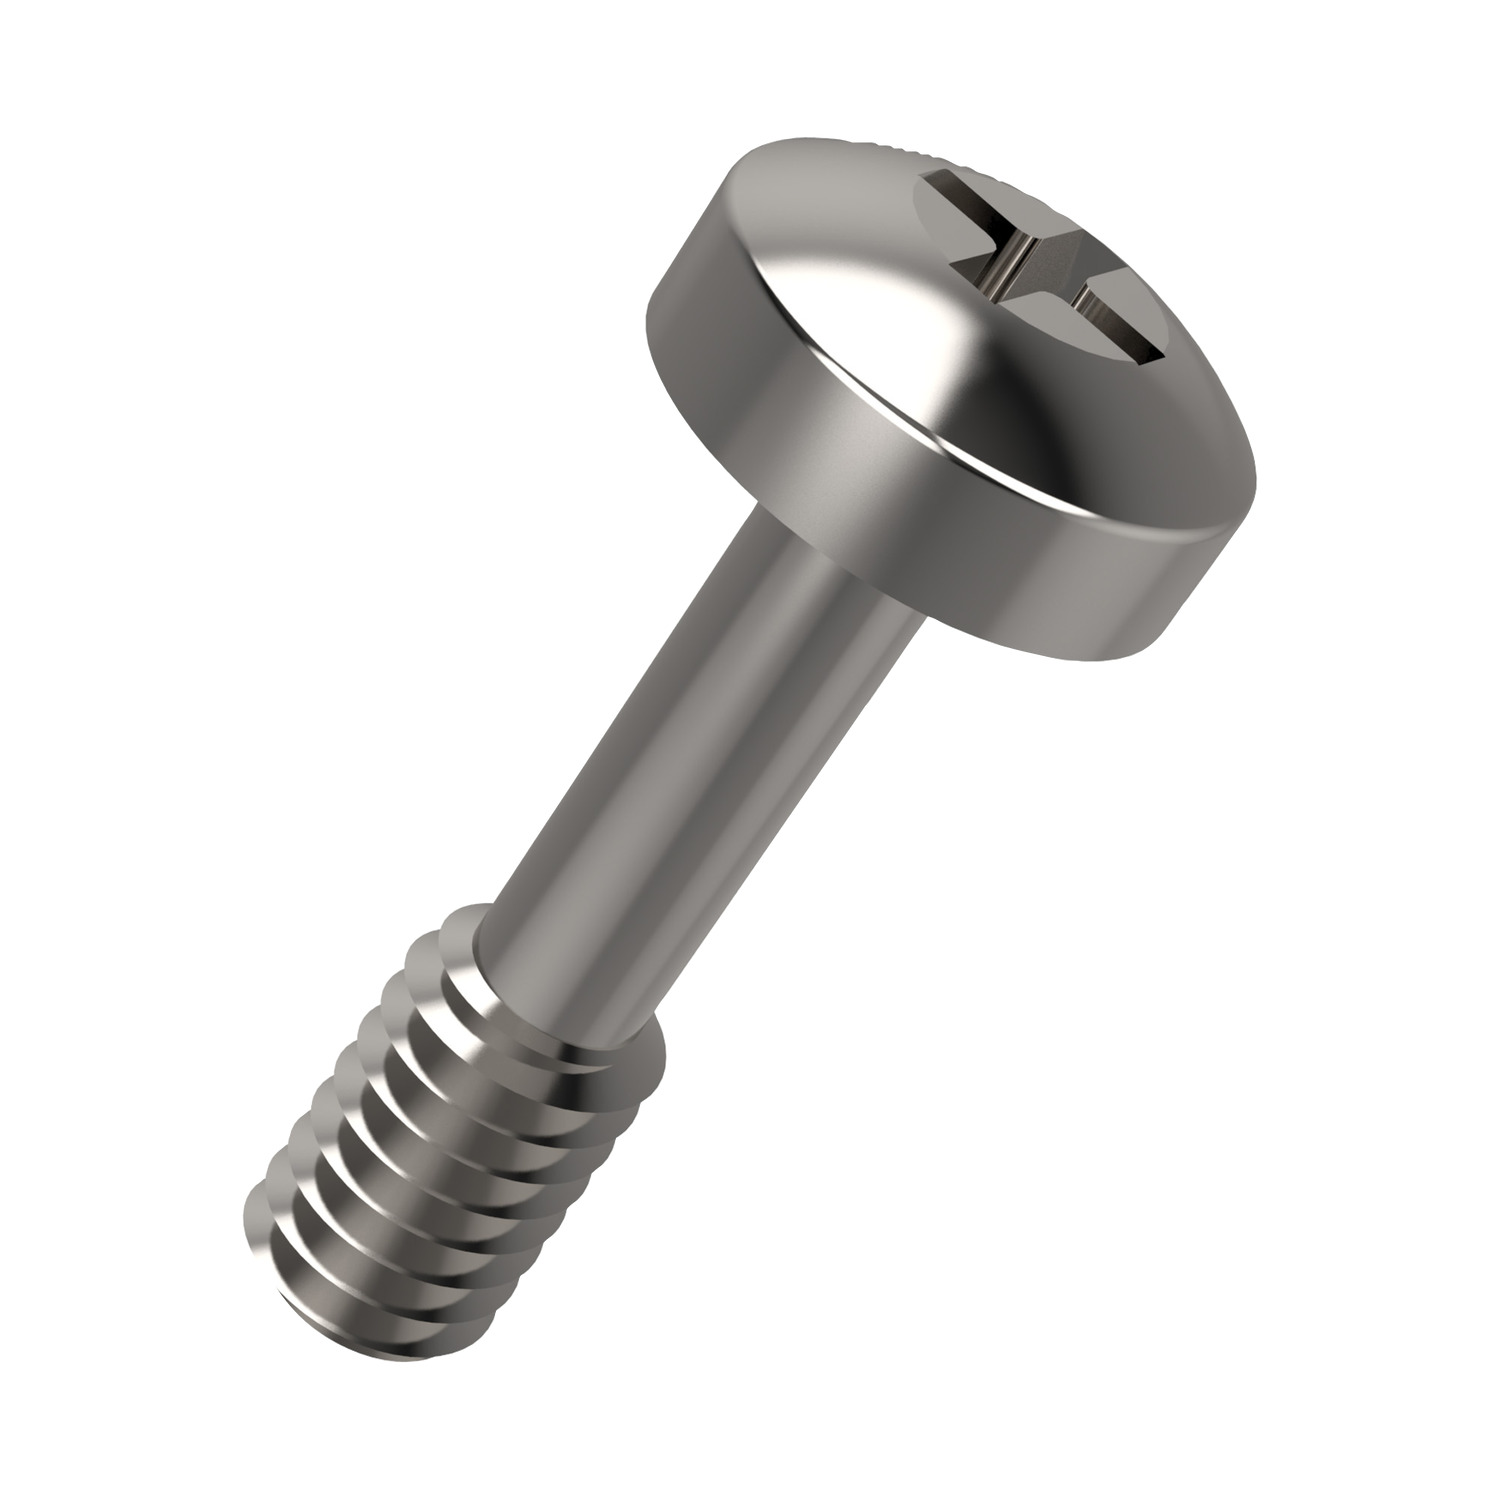 Captive Screws - Pan Head Phillips pan head captive screws available in A2 stainless steel. Many customers prefer to use torx drive P0150 captive screws as you get more grip with the torx drive.